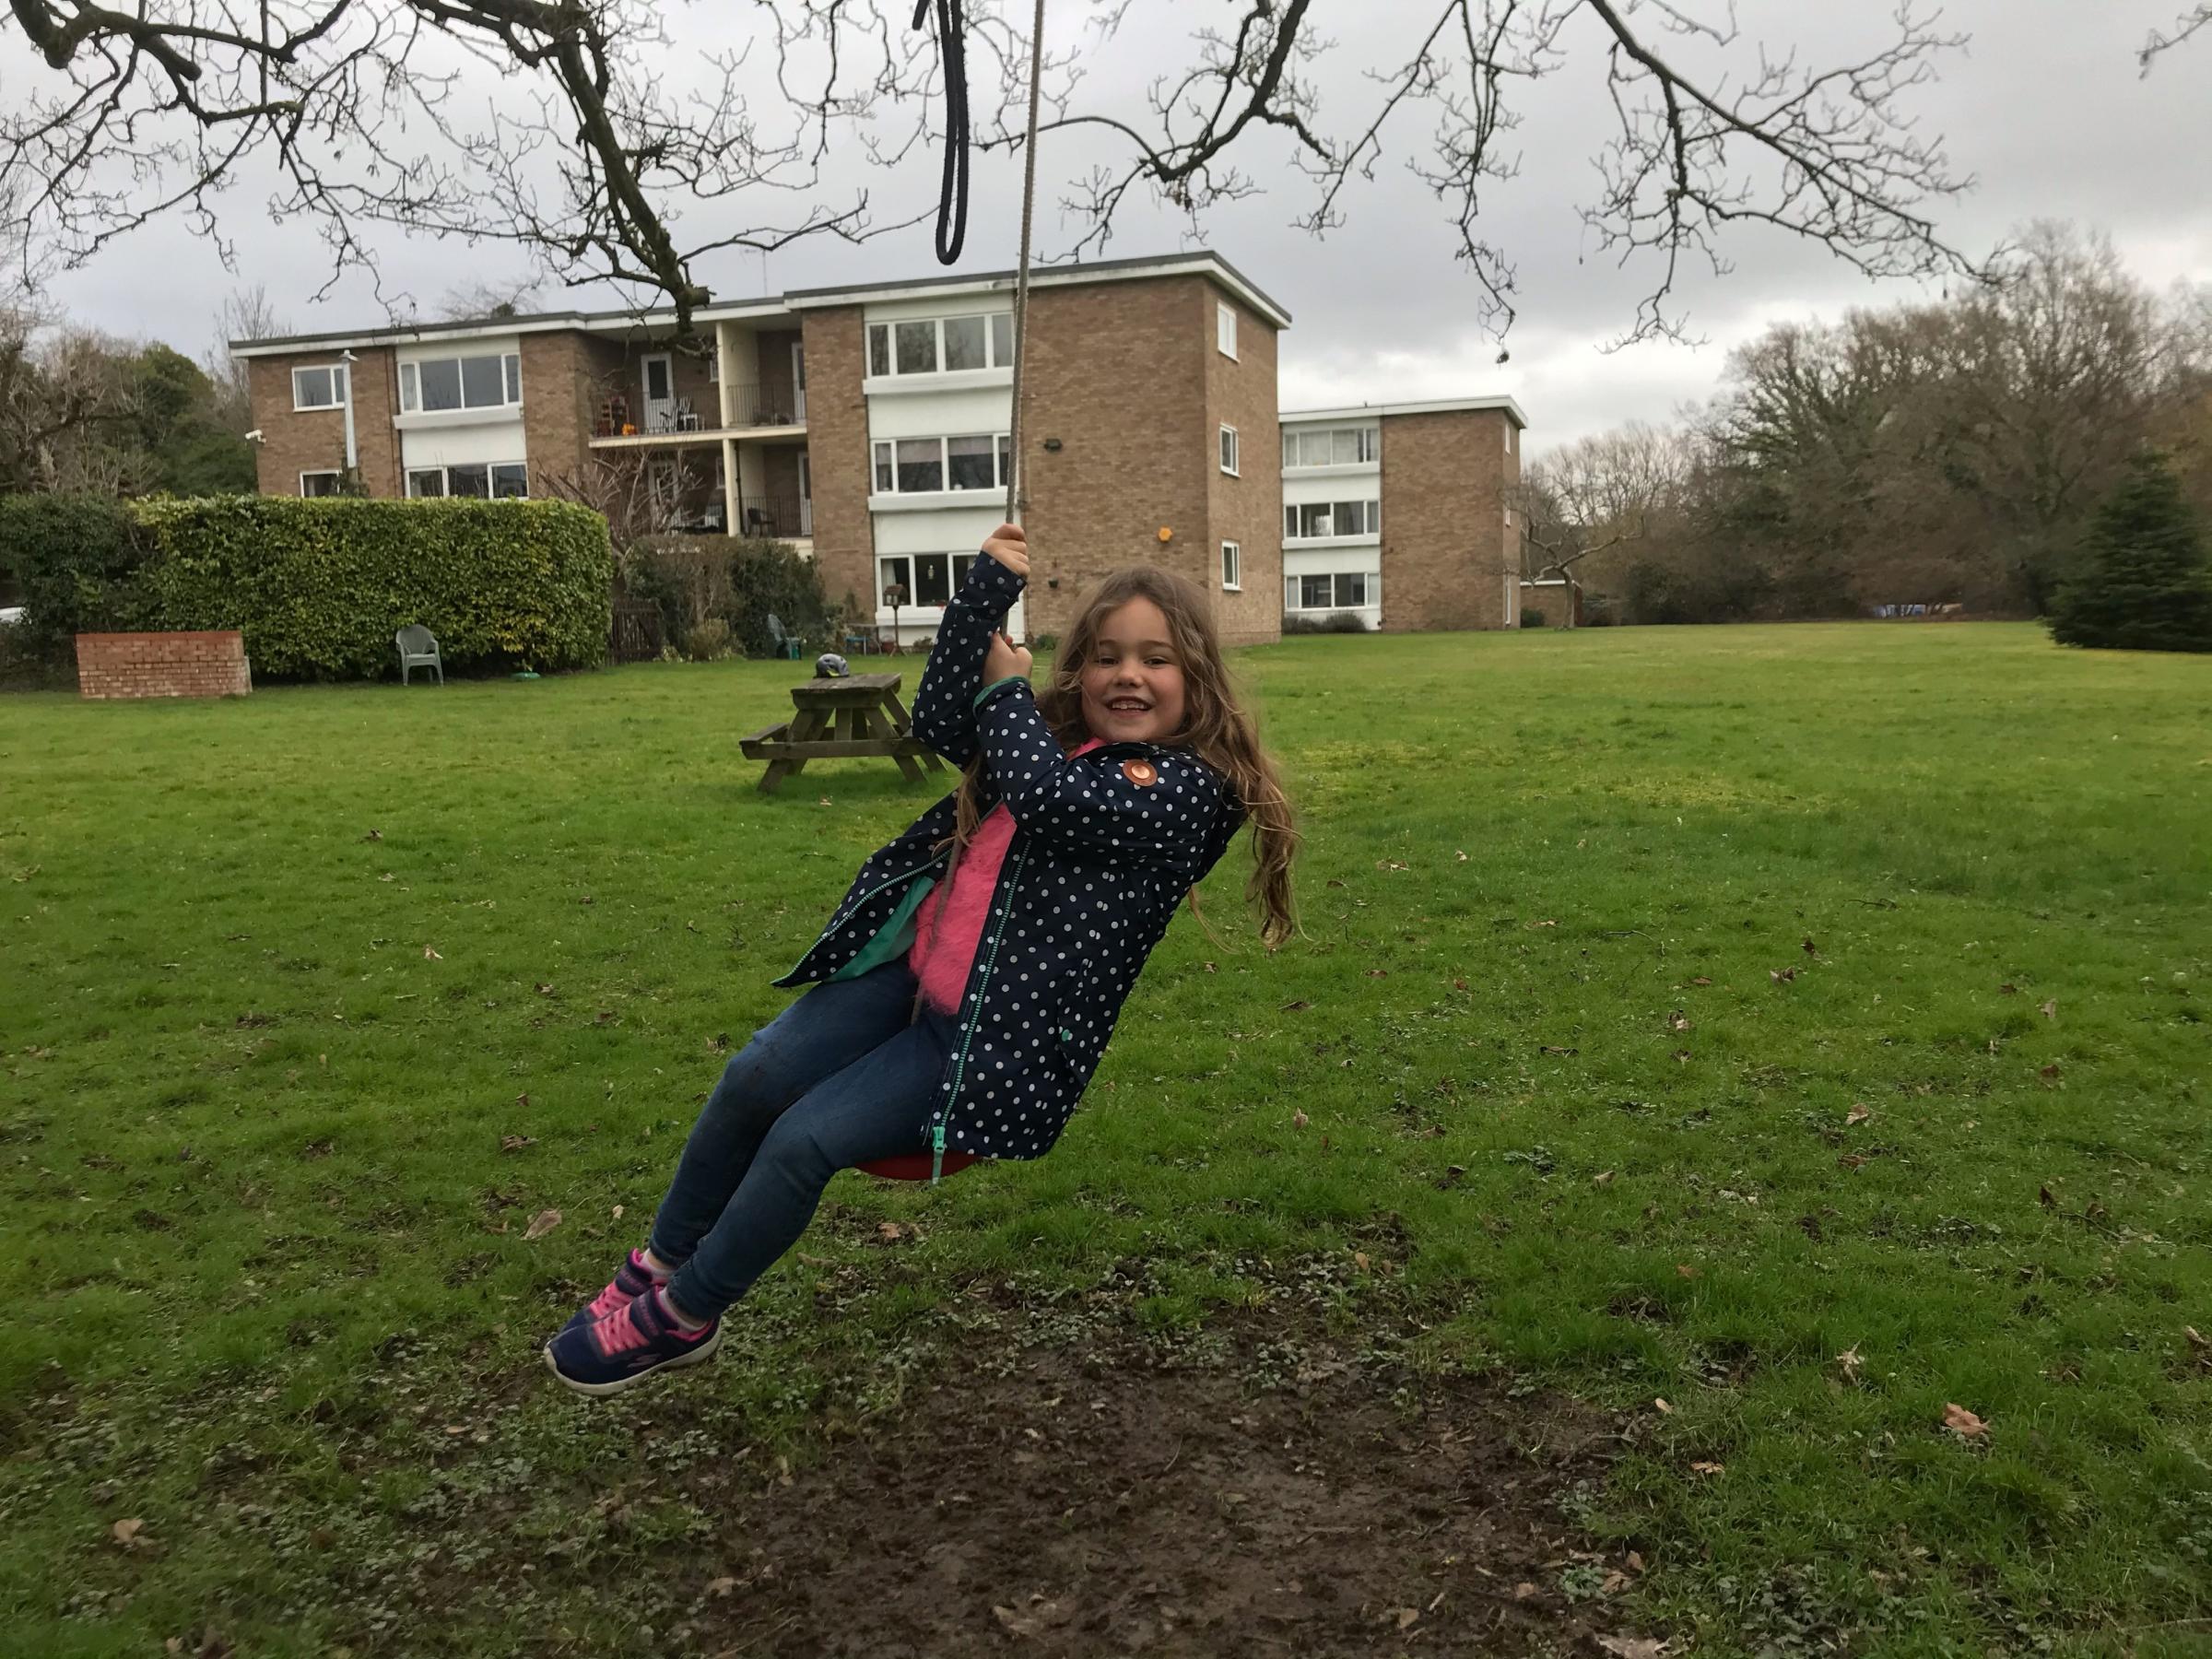 Imogen Cox playing on the swing near her uncle Jonathans home in Sycamore Road, Croxley Green